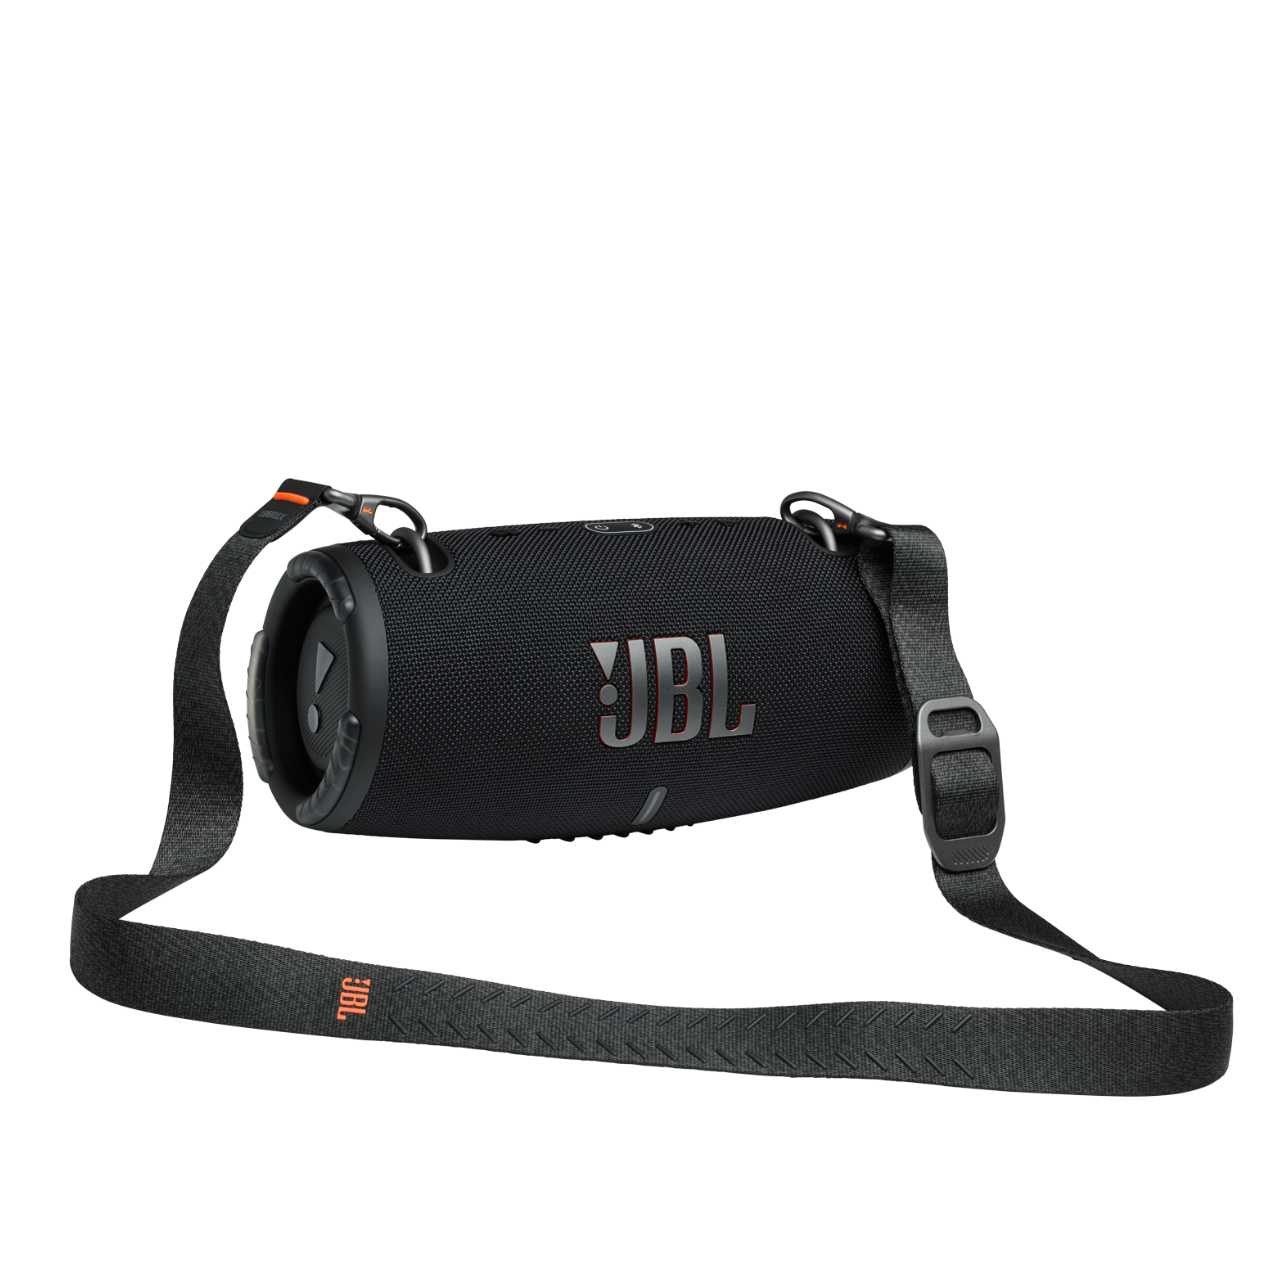 The JBL® Xtreme 2 Makes Waves with its Powerful Audio Performance